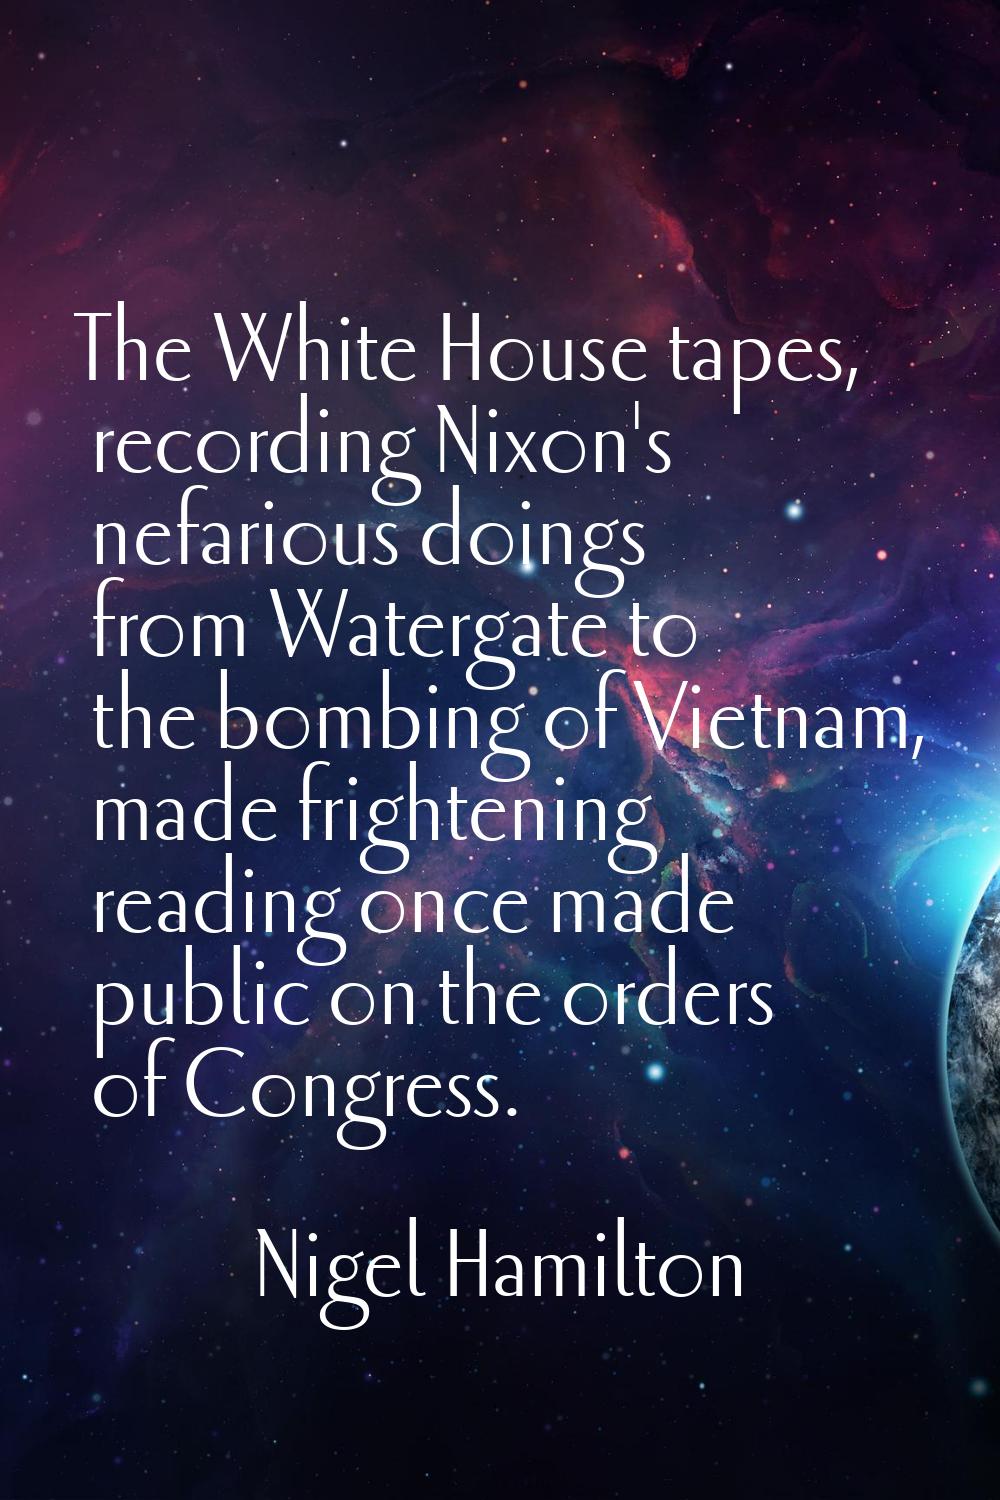 The White House tapes, recording Nixon's nefarious doings from Watergate to the bombing of Vietnam,